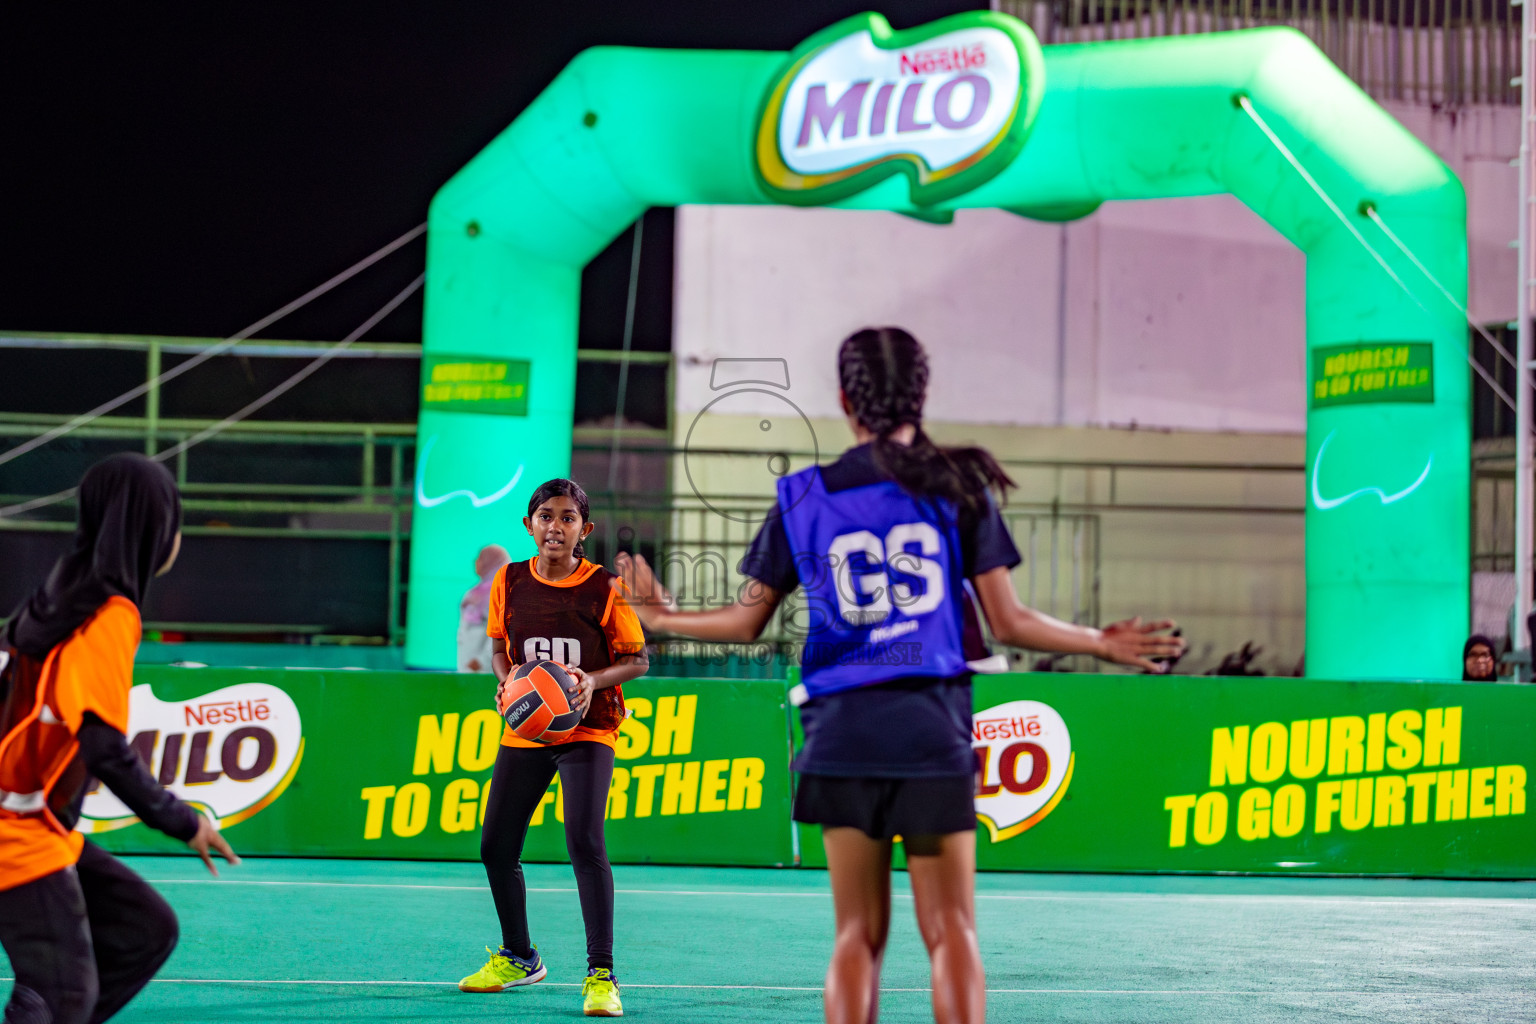 Day 6 of MILO 3x3 Netball Challenge 2024 was held in Ekuveni Netball Court at Male', Maldives on Tuesday, 19th March 2024.
Photos: Hassan Simah / images.mv